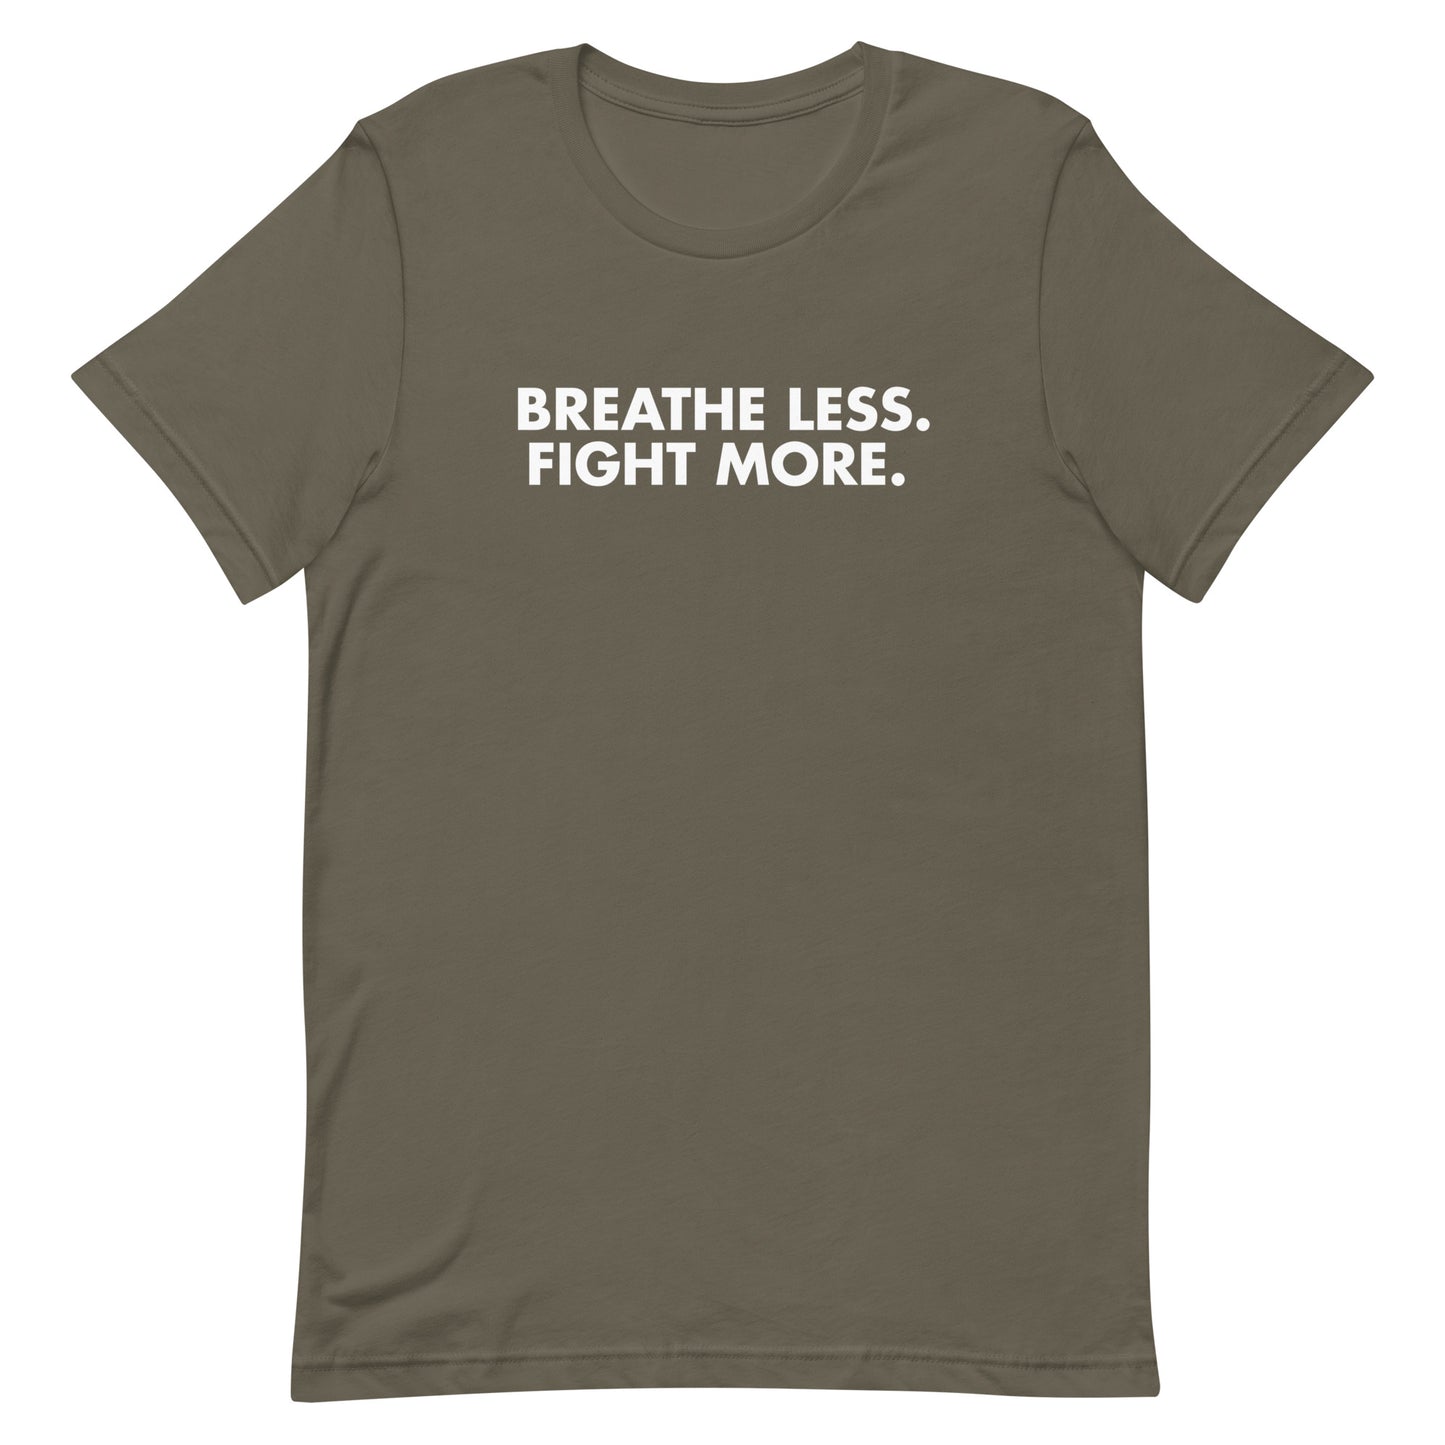 THE MINDSTRONG PROJECT BREATHE LESS T-SHIRT (MORE COLORS)